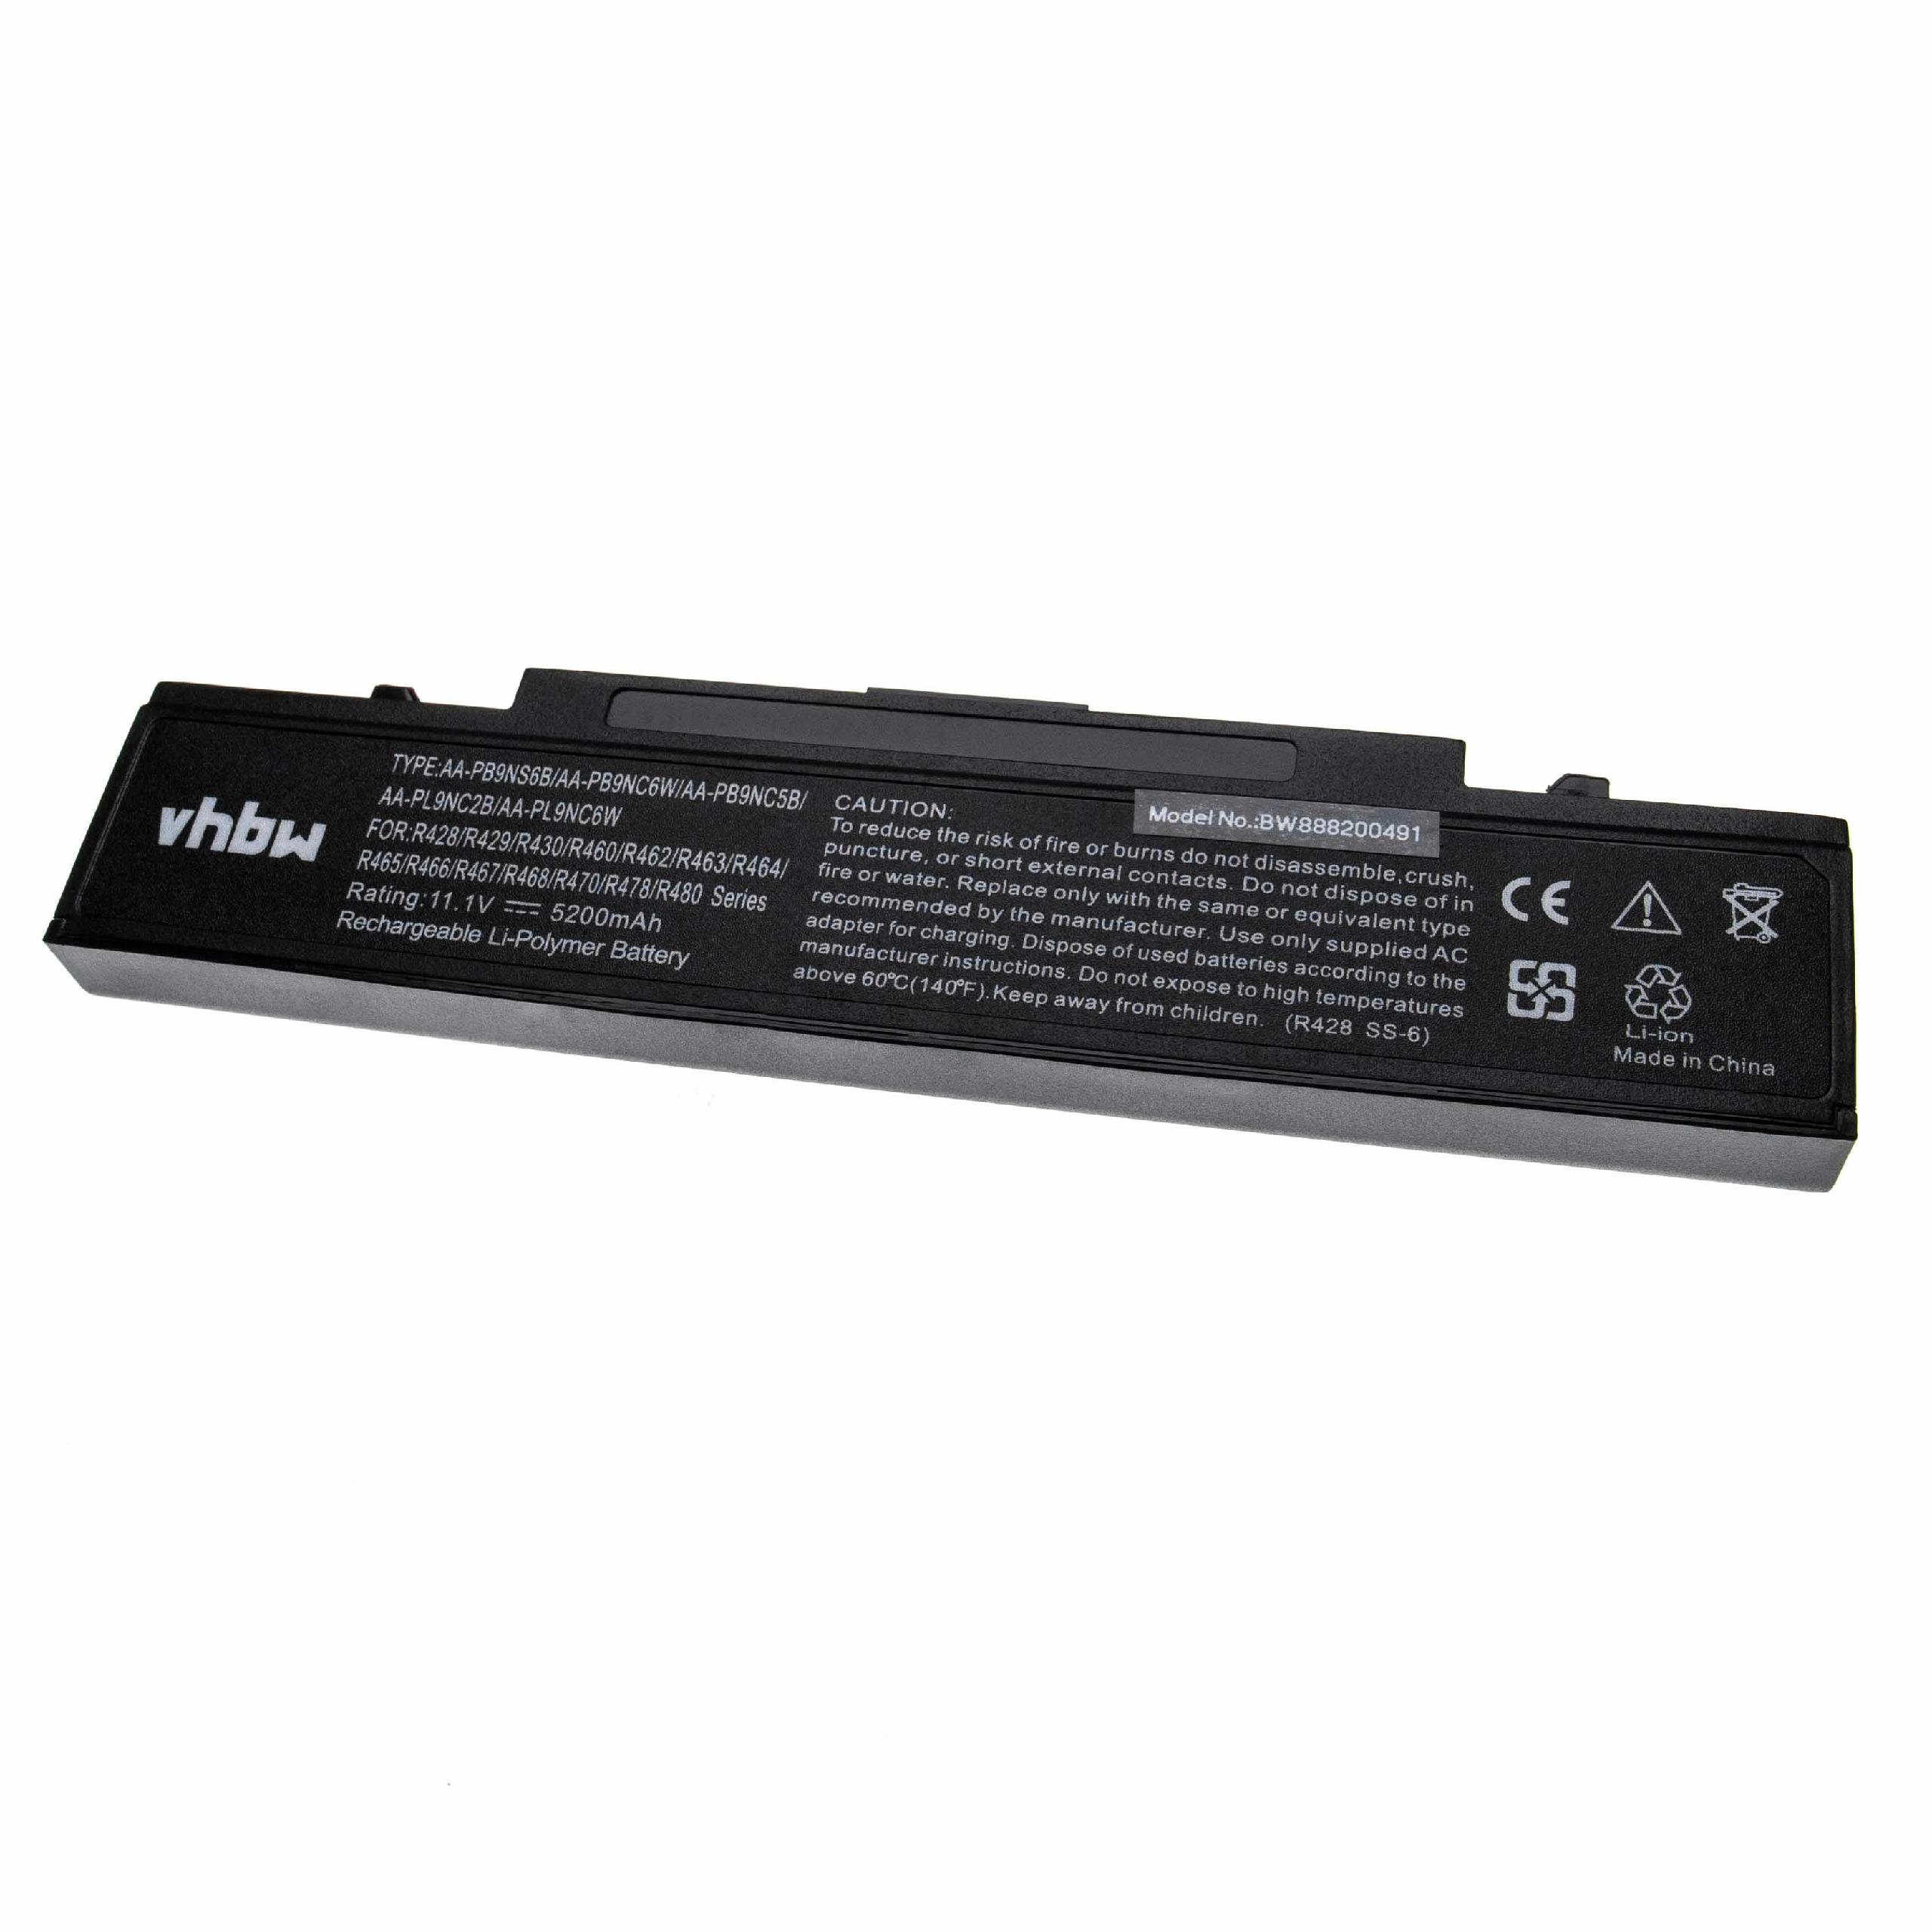 Notebook Battery Replacement for Samsung AA-PB6NC6B, AA-PB6NC6W, AA-PB9MC6B - 5200mAh 11.1V Li-Ion, black